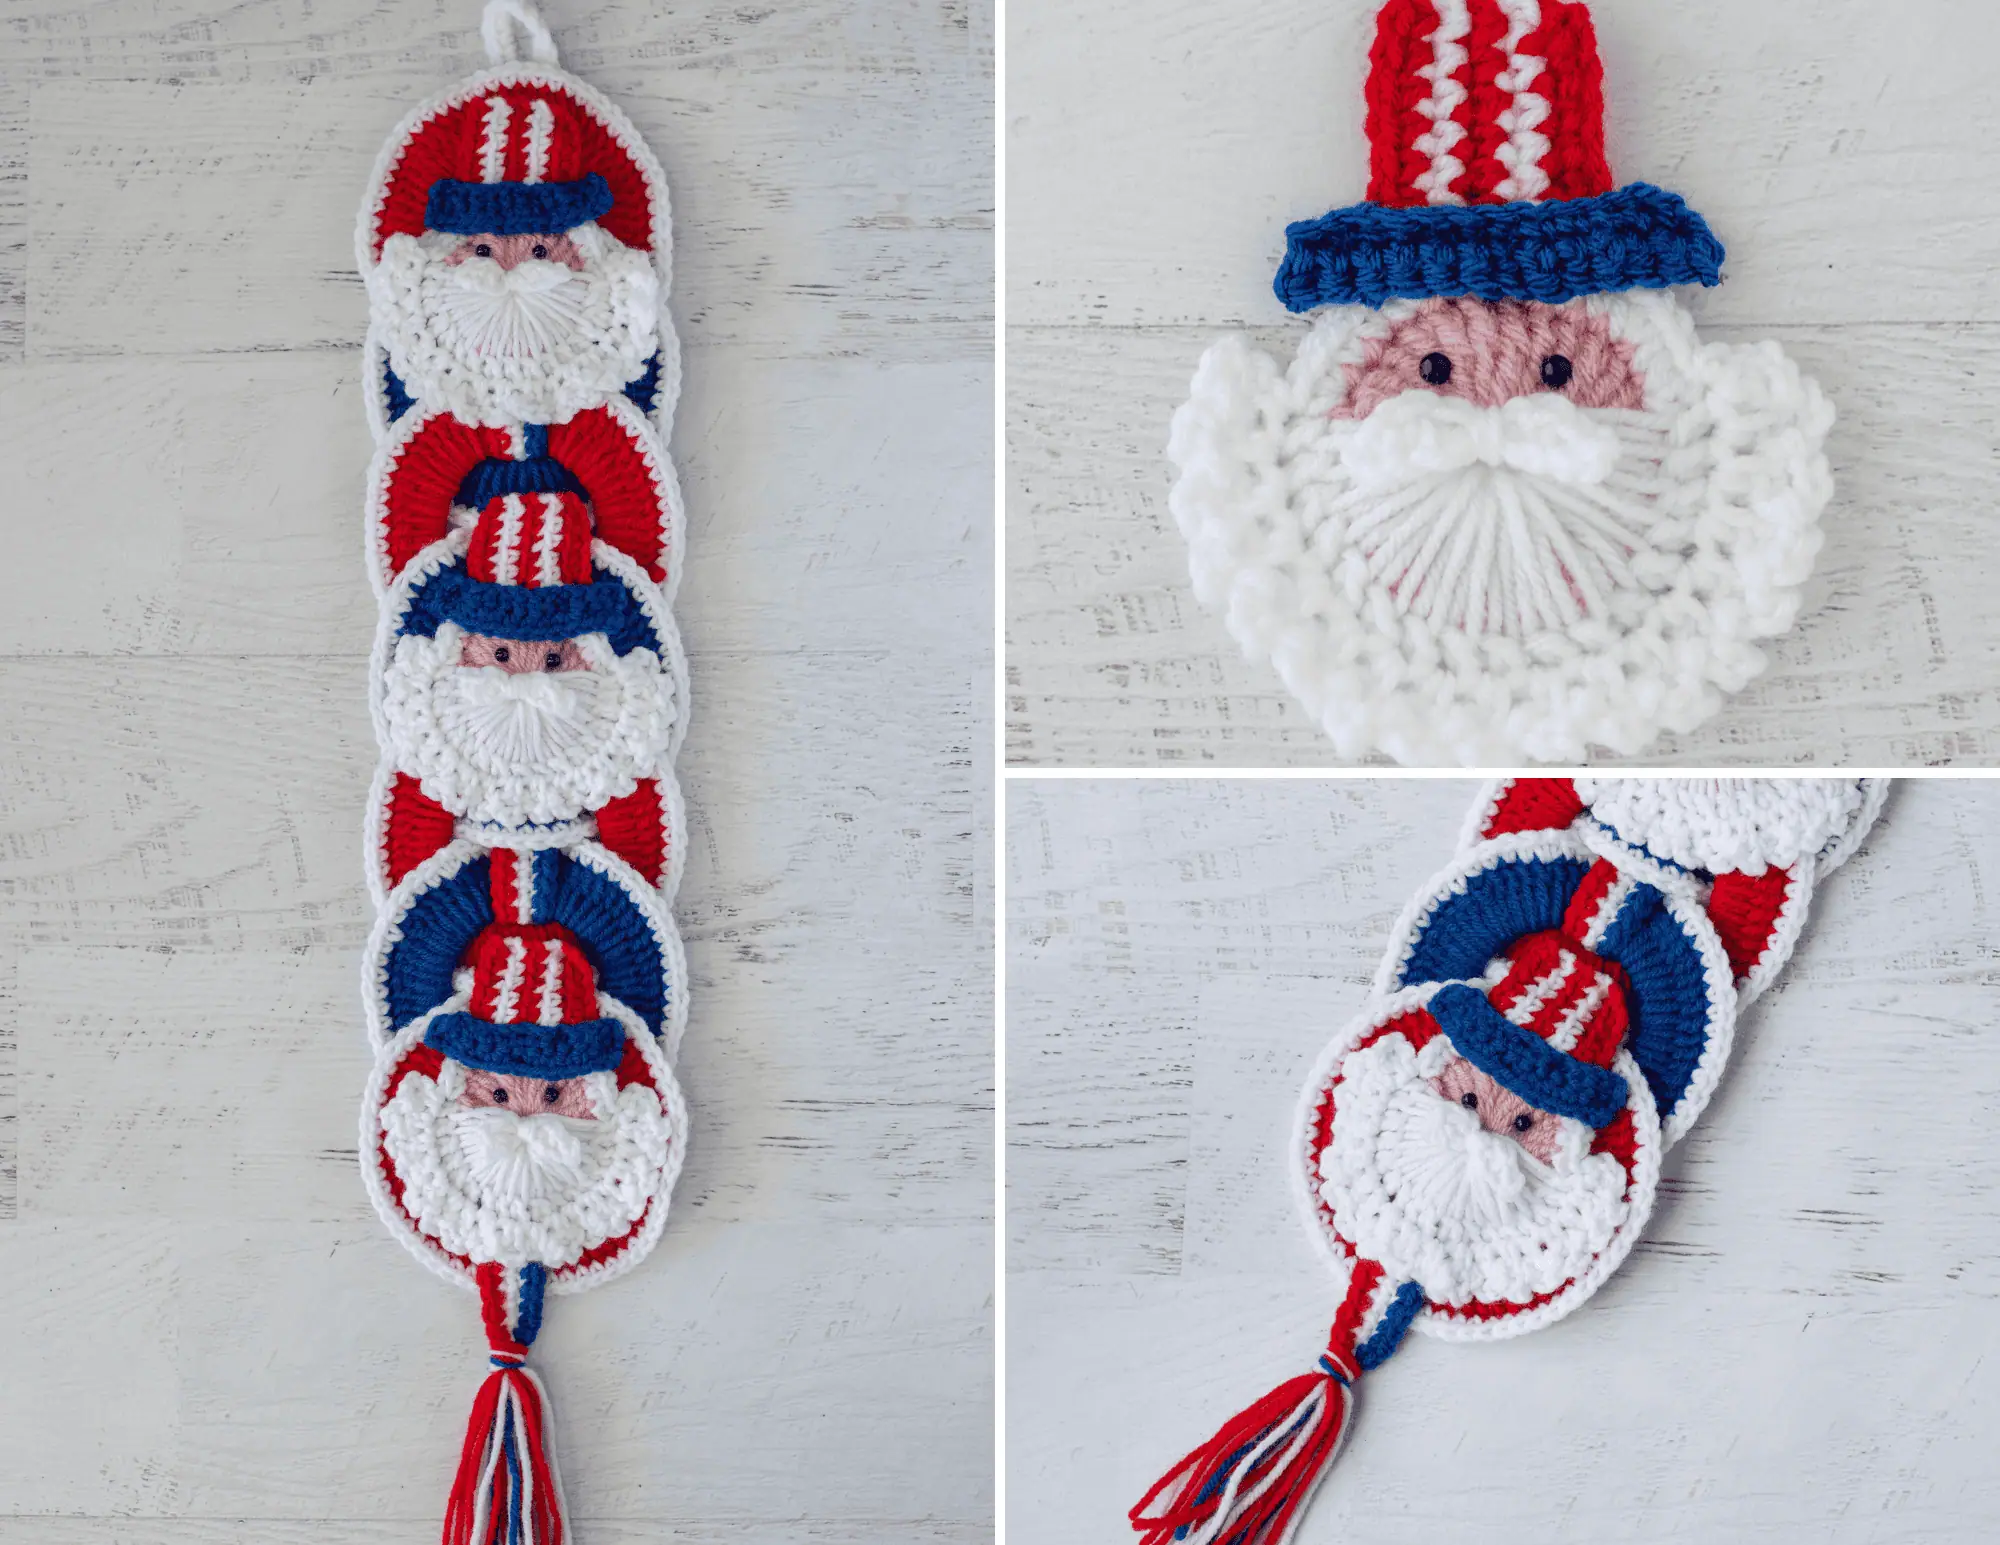 Collage of Crochet Uncle Sam Wallhanging in Red, White and Blue Yarn